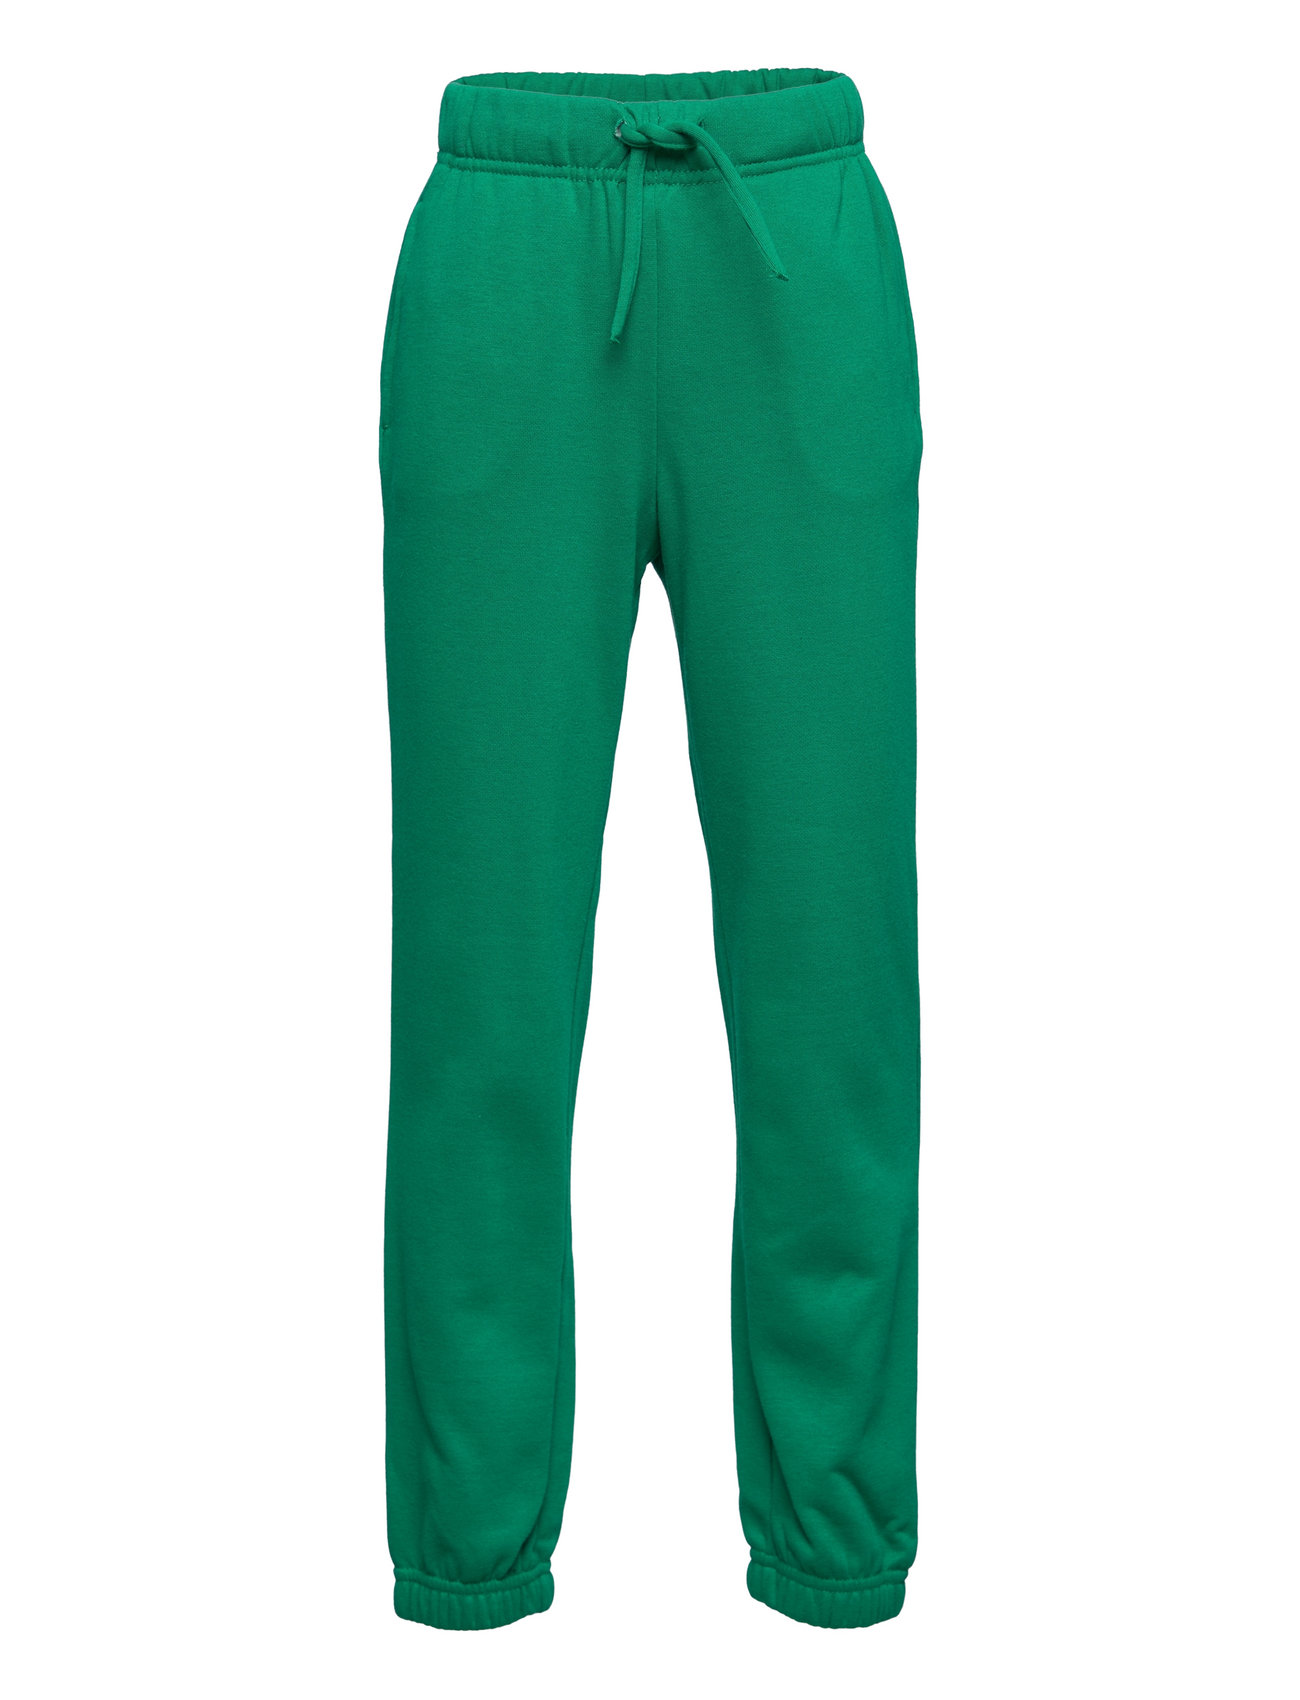 Kids Only K Very Life Mw Pull-Up Pant Pnt Green Kids Only